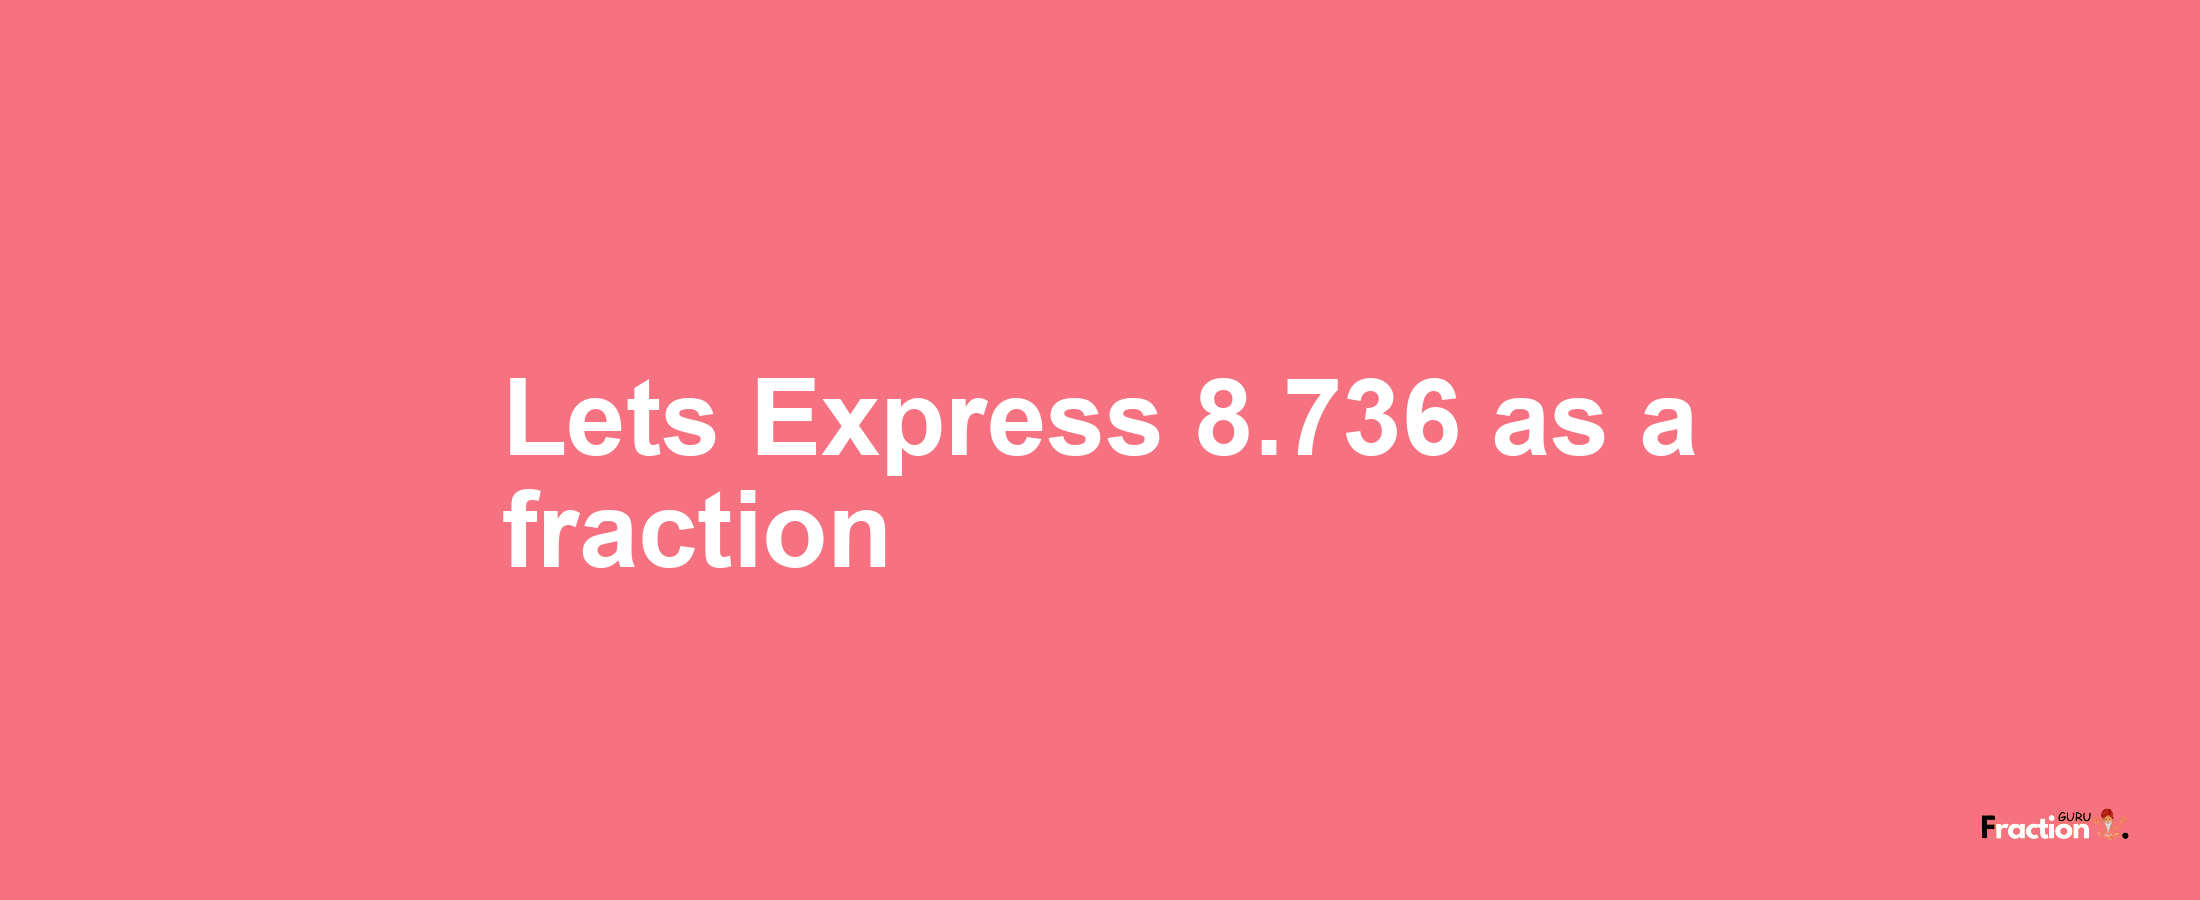 Lets Express 8.736 as afraction